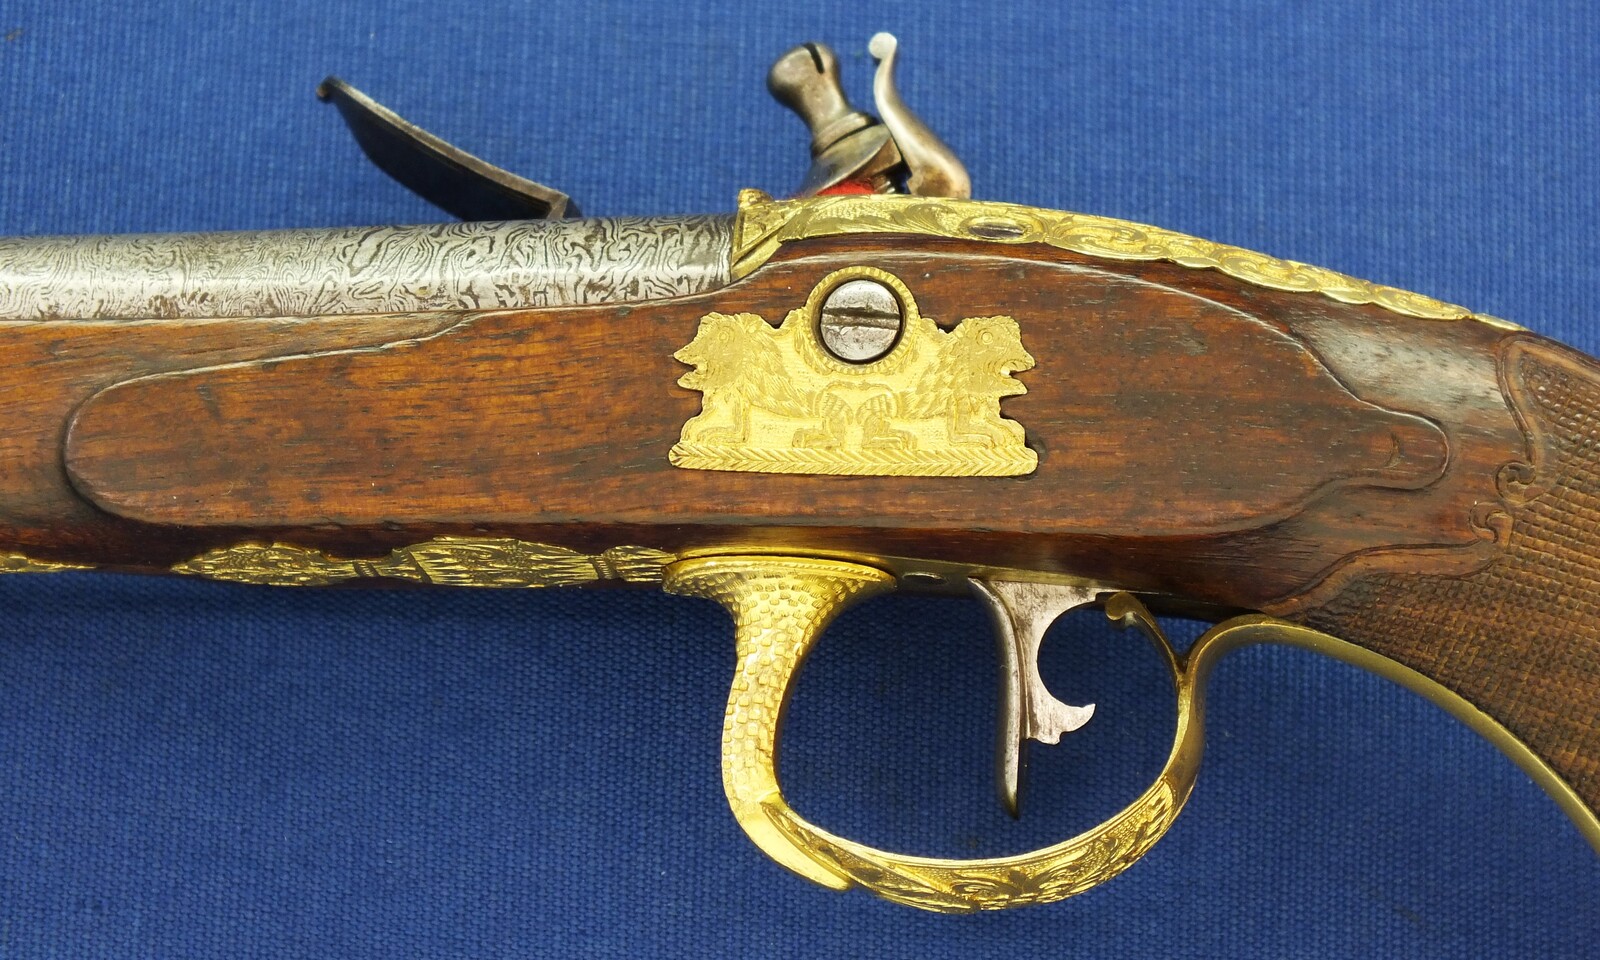 A fine antique circa 1800-20 Karlsbad type Flintlock pistol with Damascus barrel. Caliber 12mm. Length 30cm. In very good condition. Price 2.750 euro